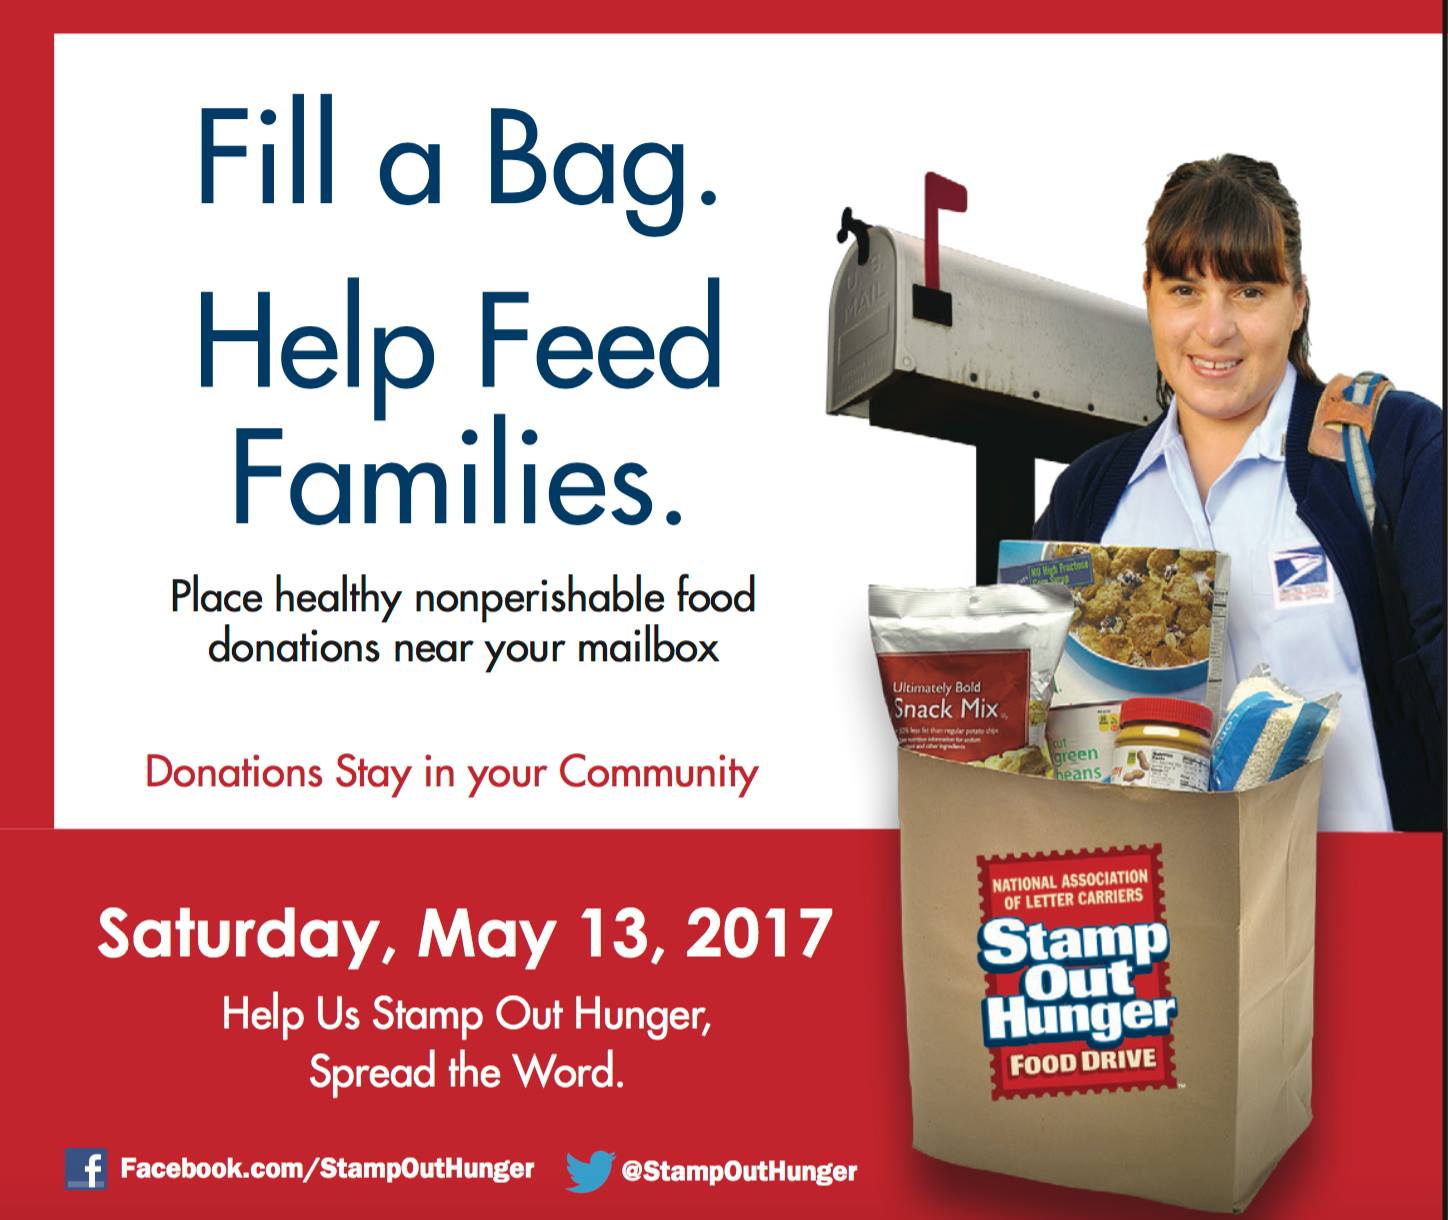 Post Office Food Drive on Saturday May 13th. Leave Non-Perishable Foods at Mailbox.